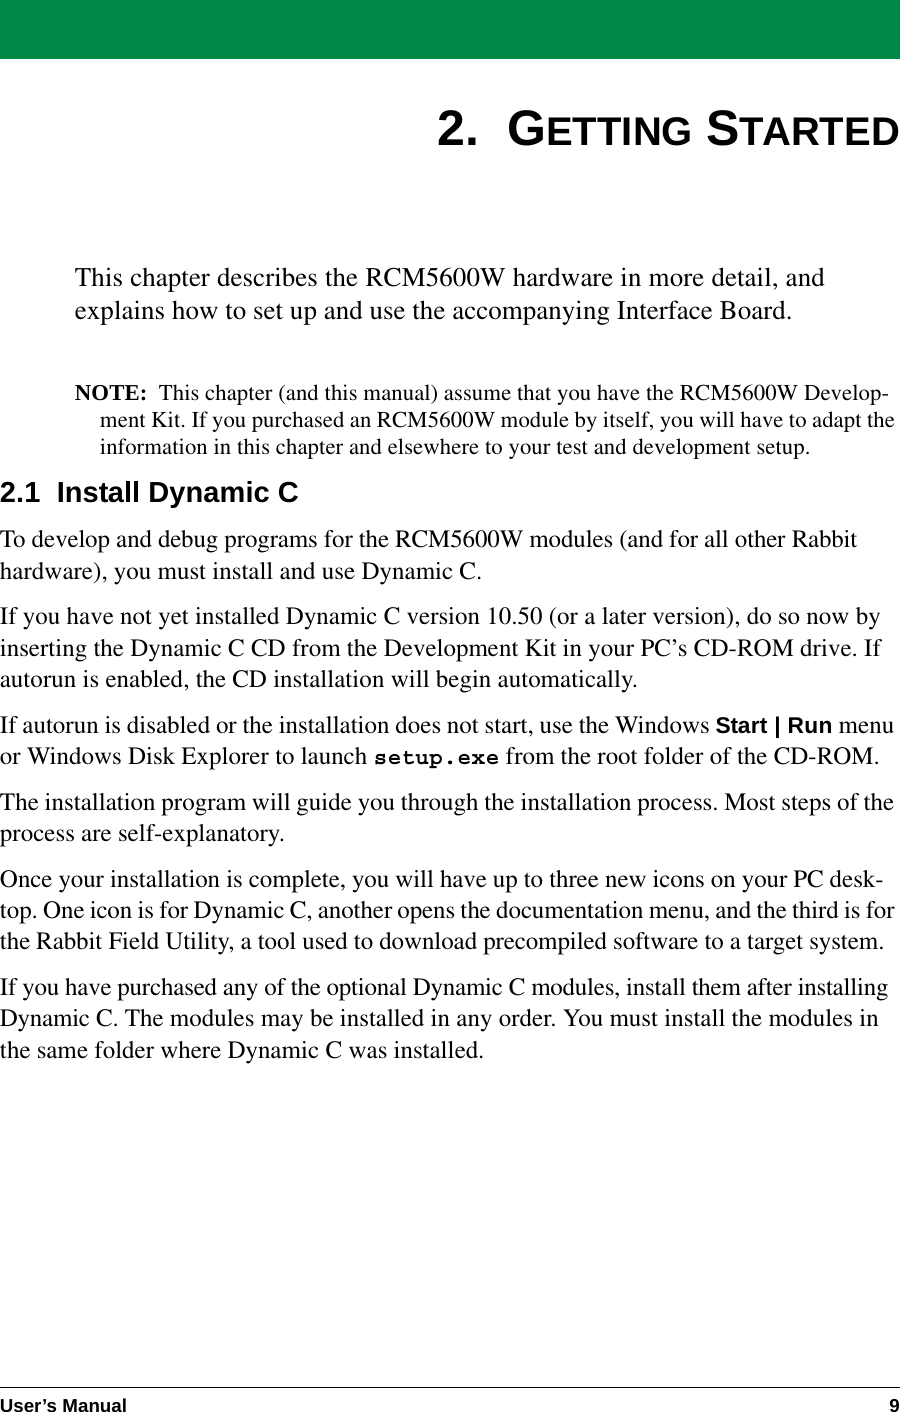 User’s Manual 92.  GETTING STARTEDThis chapter describes the RCM5600W hardware in more detail, andexplains how to set up and use the accompanying Interface Board.NOTE: This chapter (and this manual) assume that you have the RCM5600W Develop-ment Kit. If you purchased an RCM5600W module by itself, you will have to adapt the information in this chapter and elsewhere to your test and development setup.2.1  Install Dynamic CTo develop and debug programs for the RCM5600W modules (and for all other Rabbit hardware), you must install and use Dynamic C.If you have not yet installed Dynamic C version 10.50 (or a later version), do so now by inserting the Dynamic C CD from the Development Kit in your PC’s CD-ROM drive. If autorun is enabled, the CD installation will begin automatically.If autorun is disabled or the installation does not start, use the Windows Start | Run menu or Windows Disk Explorer to launch setup.exe from the root folder of the CD-ROM.The installation program will guide you through the installation process. Most steps of the process are self-explanatory.Once your installation is complete, you will have up to three new icons on your PC desk-top. One icon is for Dynamic C, another opens the documentation menu, and the third is for the Rabbit Field Utility, a tool used to download precompiled software to a target system.If you have purchased any of the optional Dynamic C modules, install them after installing Dynamic C. The modules may be installed in any order. You must install the modules in the same folder where Dynamic C was installed.